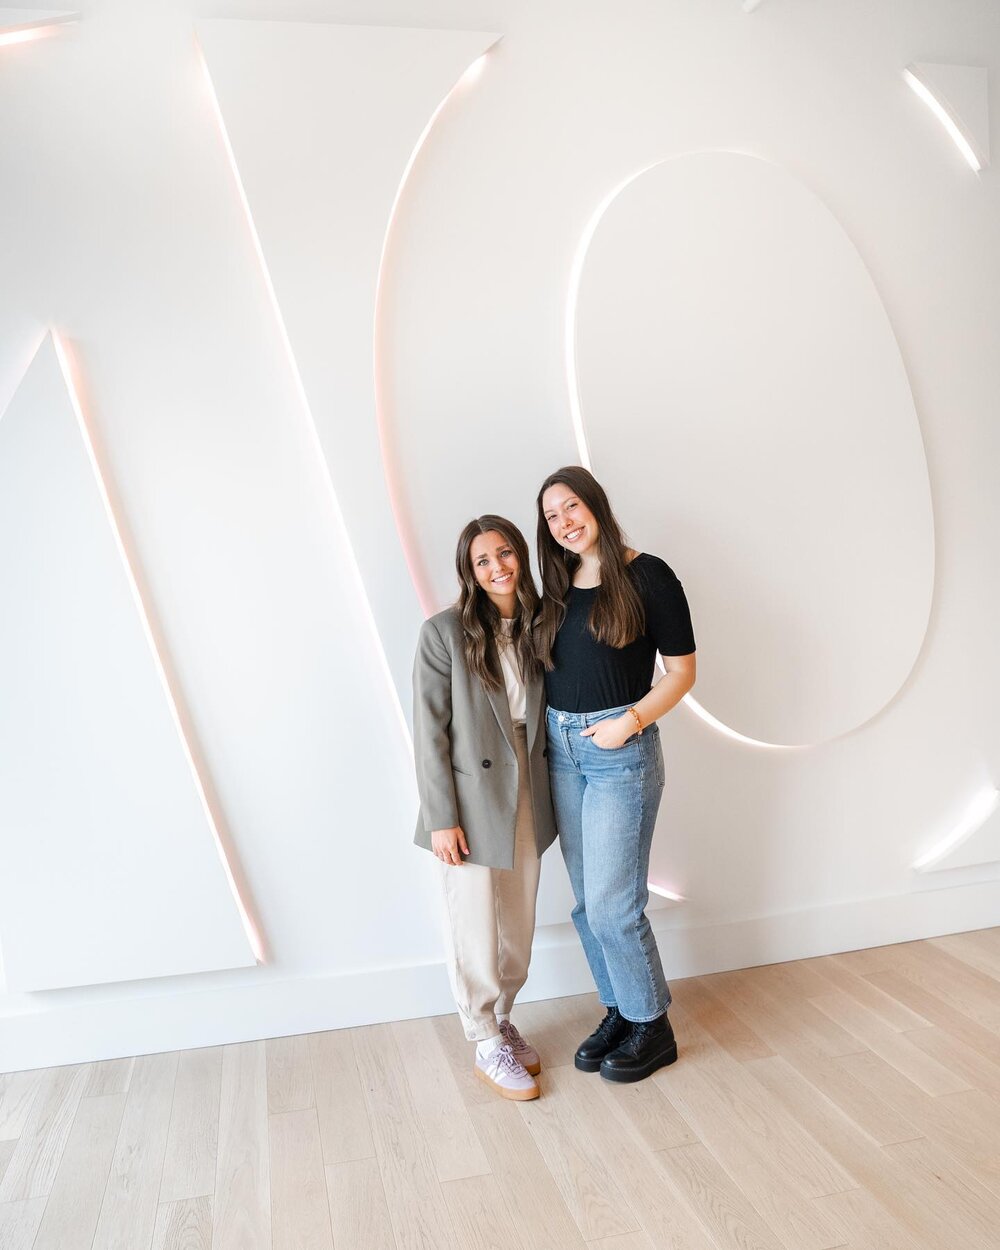 We are welcoming two of our three Summer Interns to #teamTENFOLD this week! &ndash; &nbsp;Bella Fredritz, Multimedia Intern, and Lillia Bishop, Graphic Design Intern.

Bella will be a Sophomore at Ashland University this Fall and Lillia will be enter